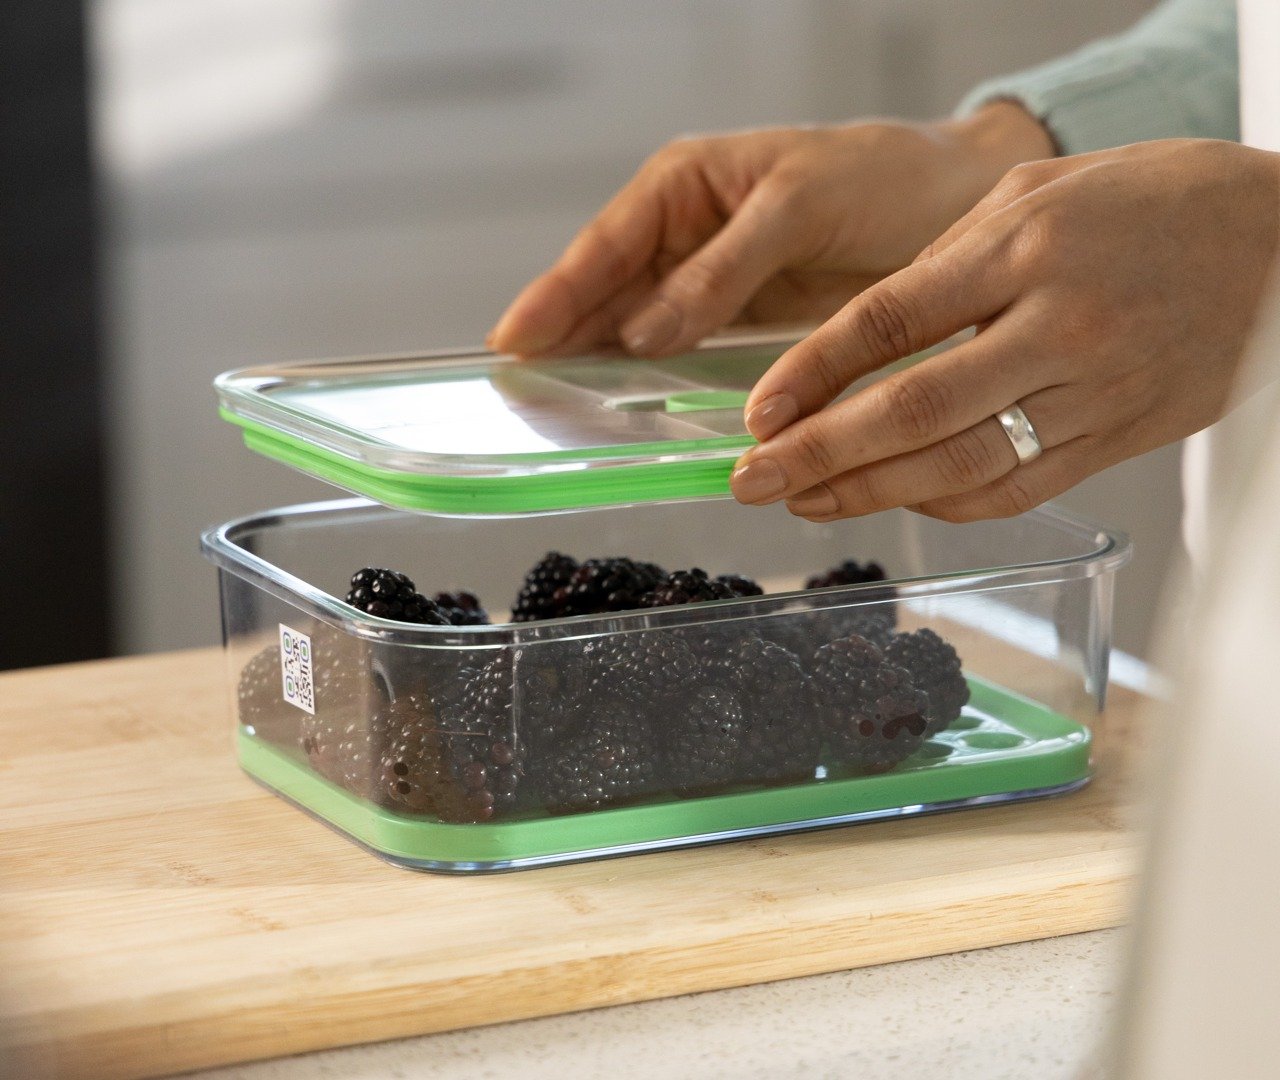 Intelli Innovations - VacuFresh Containers